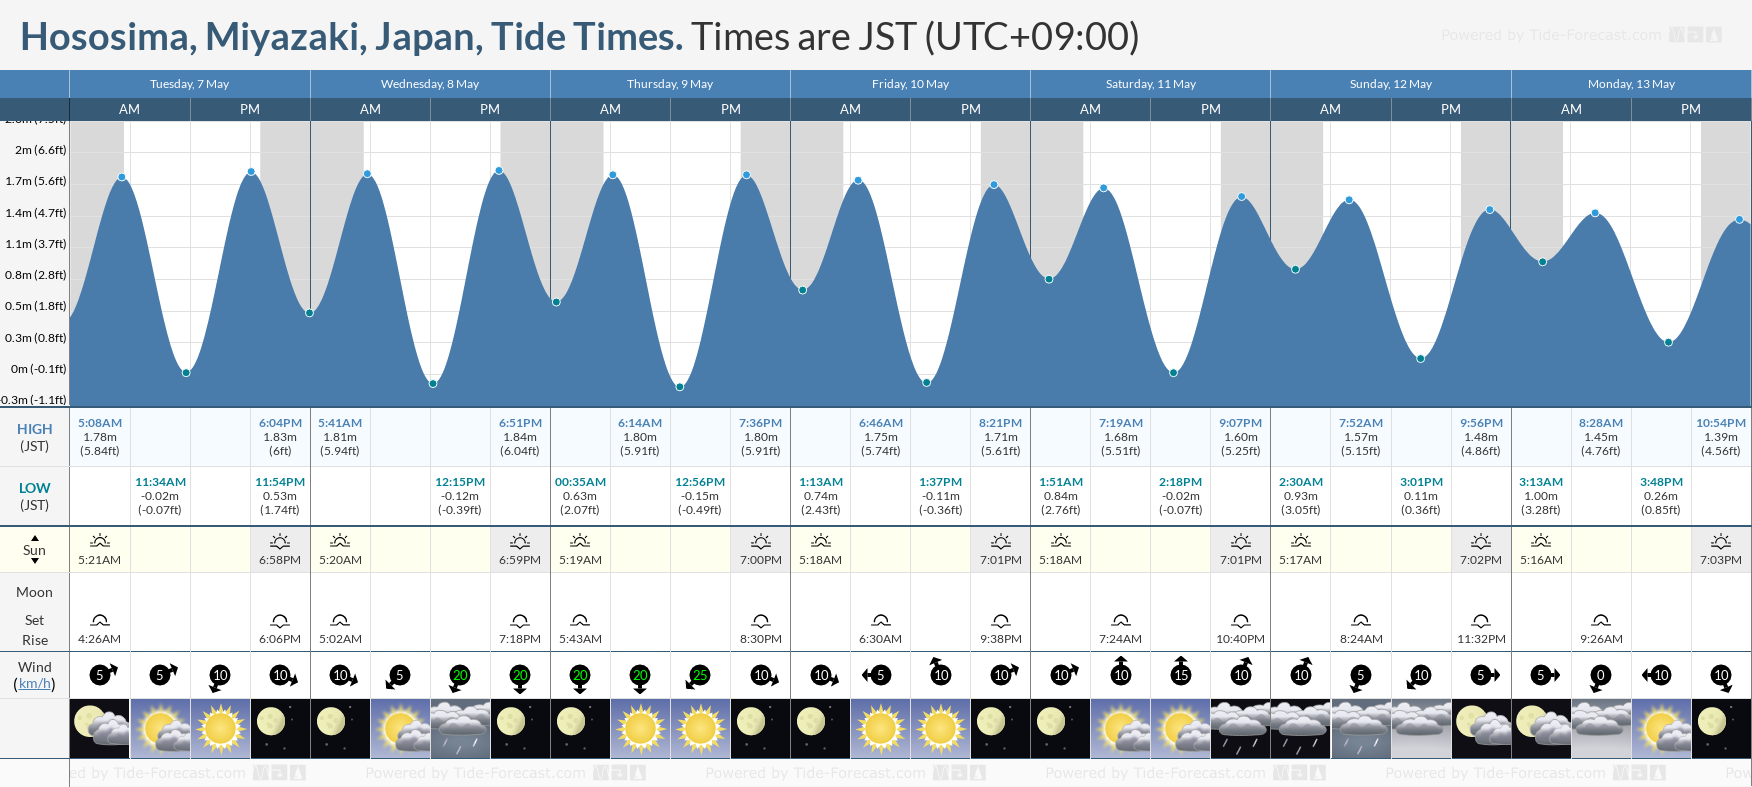 Hososima, Miyazaki, Japan Tide Chart including high and low tide tide times for the next 7 days